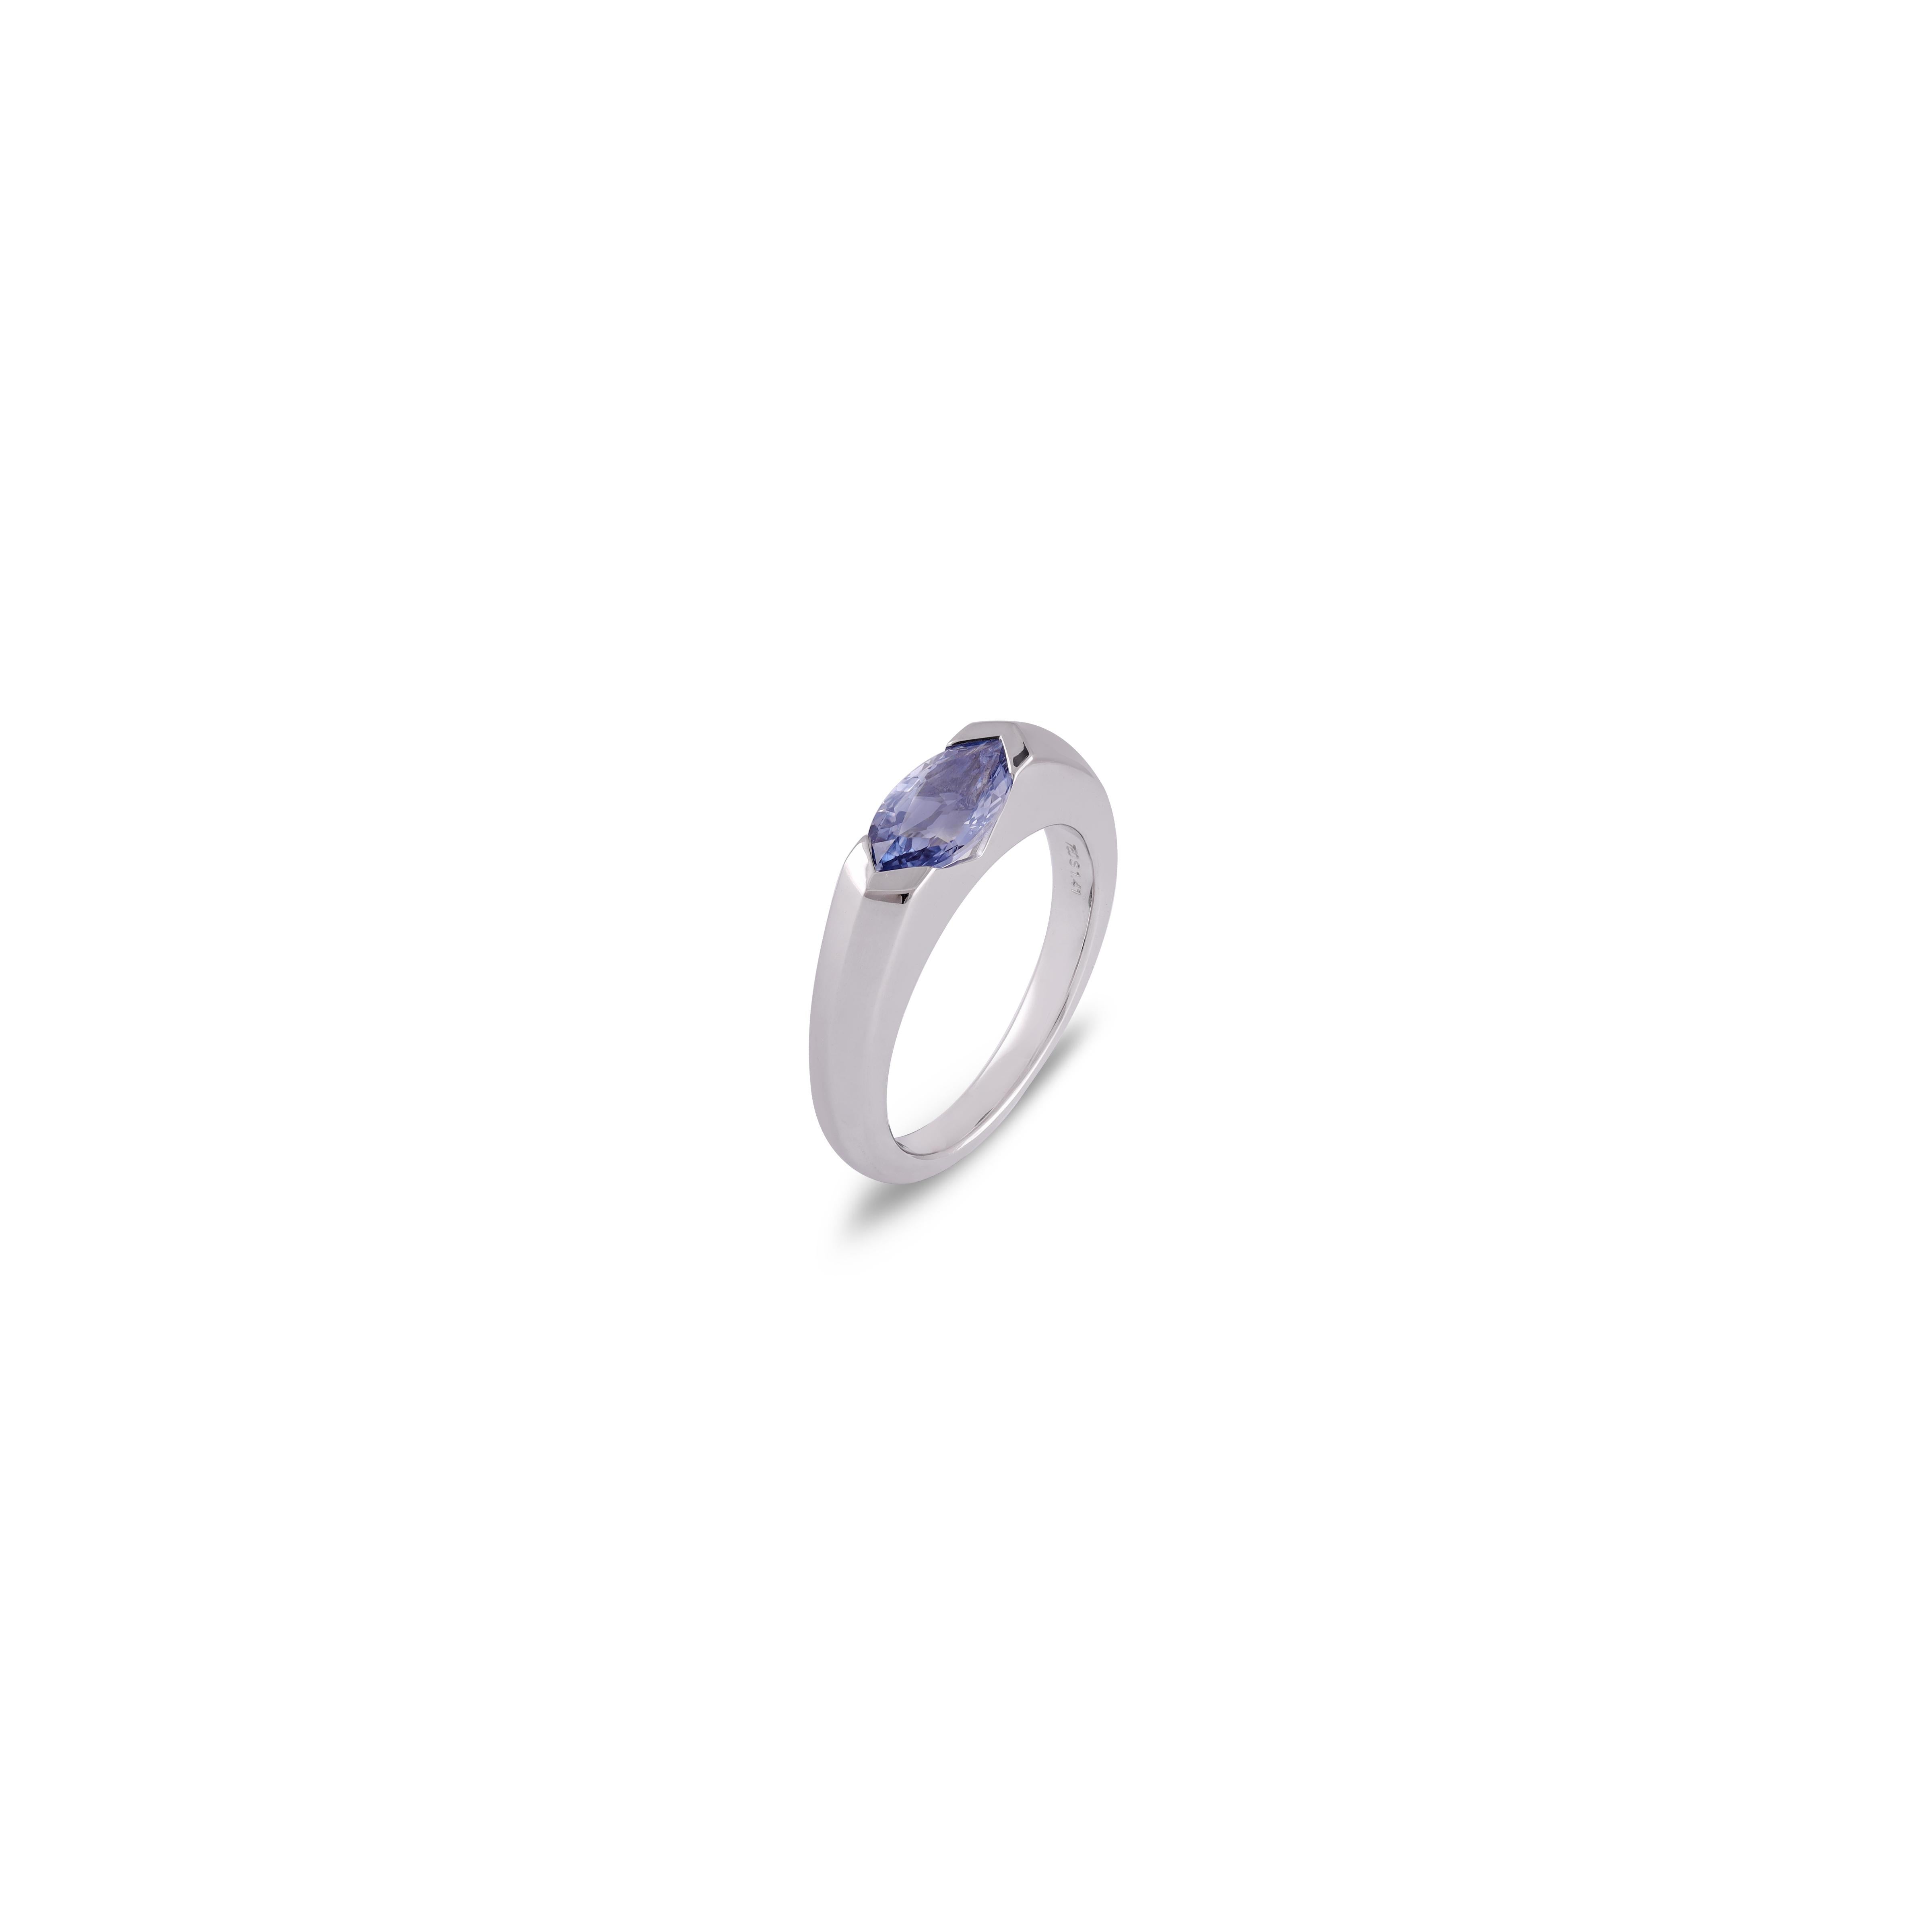 Marquise Cut 1.41 Cts Clear Blue Sapphire Ring in 18k White Gold For Sale